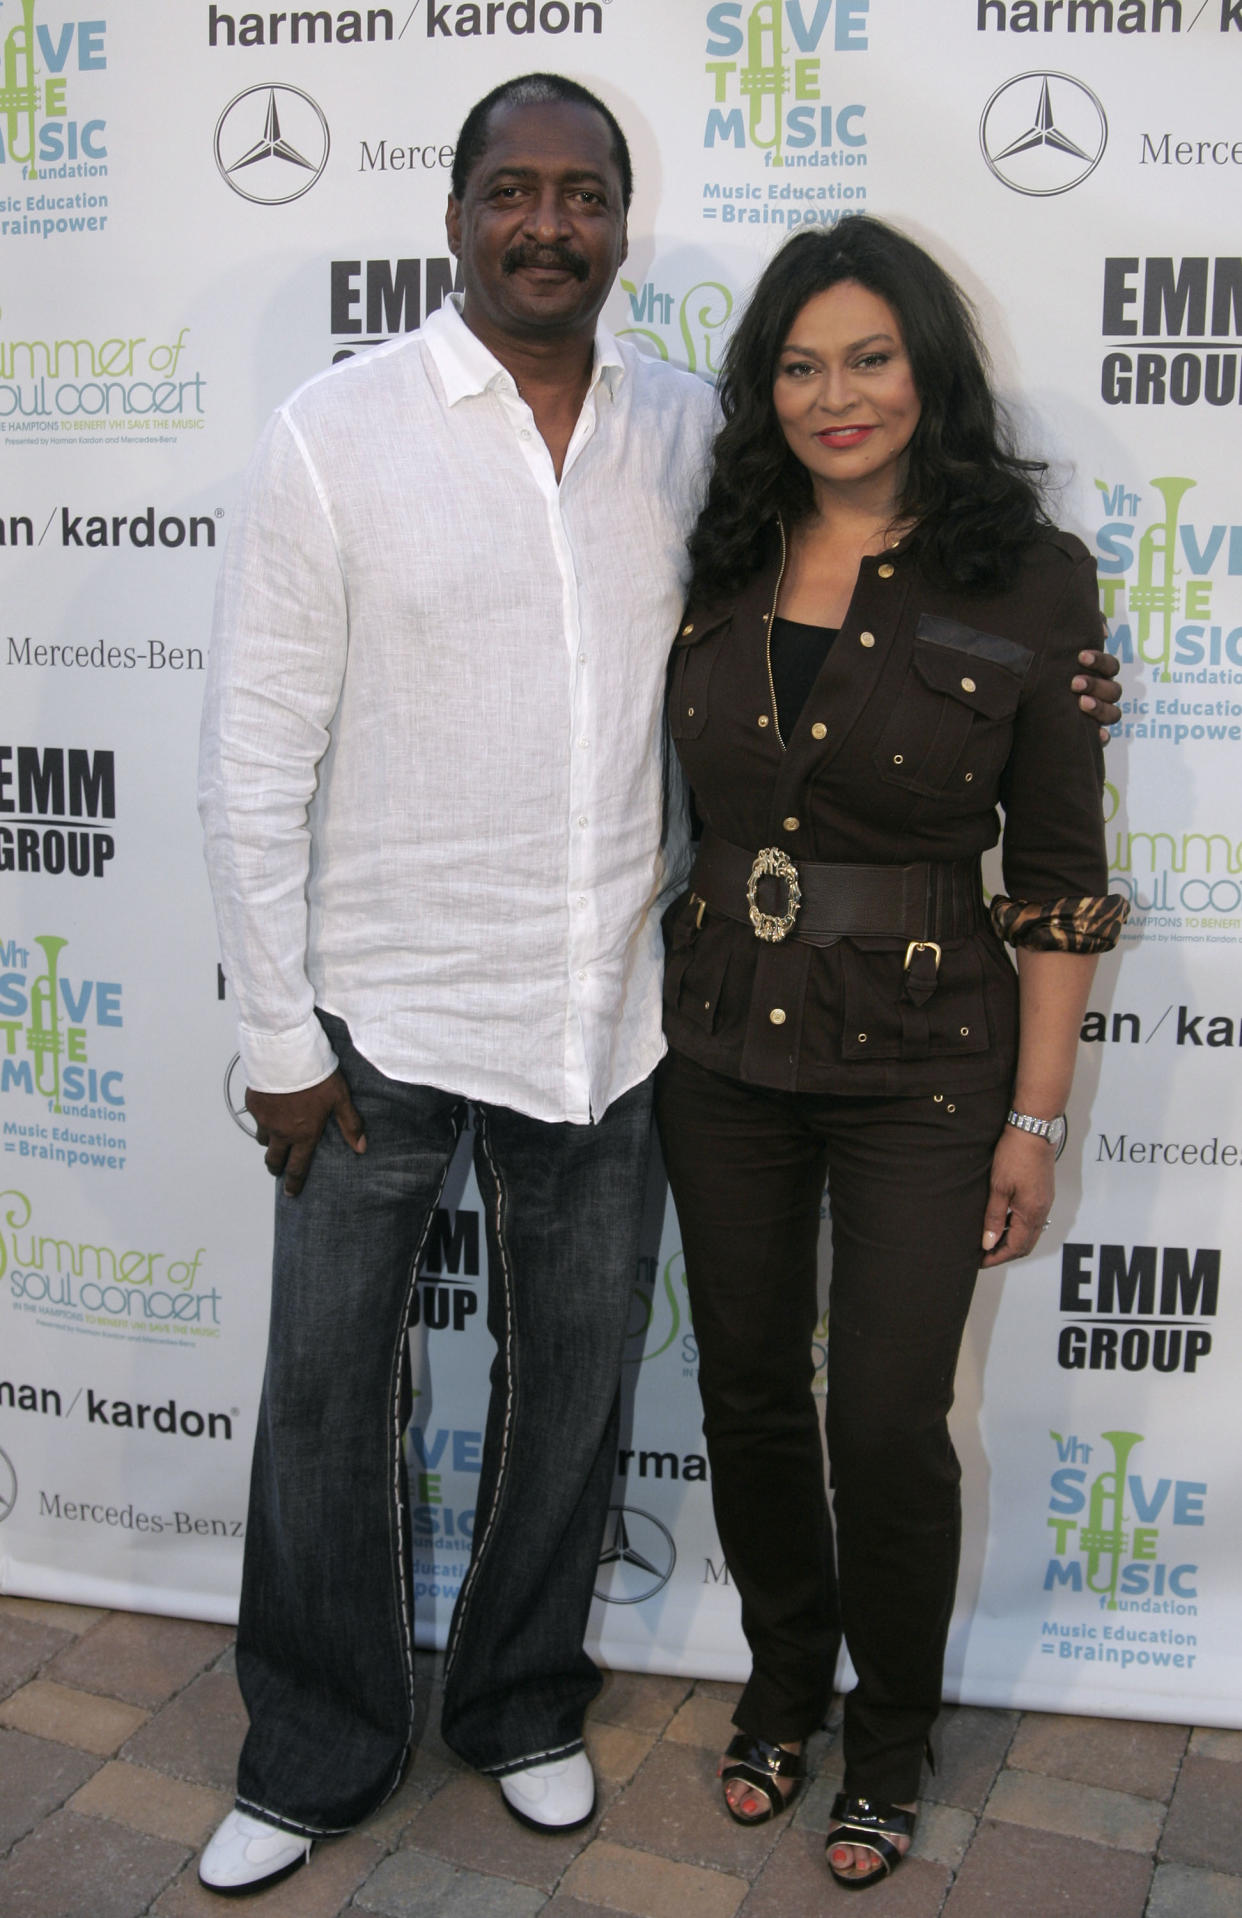 Matthew Knowles and Tina Knowles arrive at the VH1 Save The Music Foundation Summer of Soul Concert in Watermill, N.Y., Friday, July 18, 2008. (AP Photo/Ed Betz)